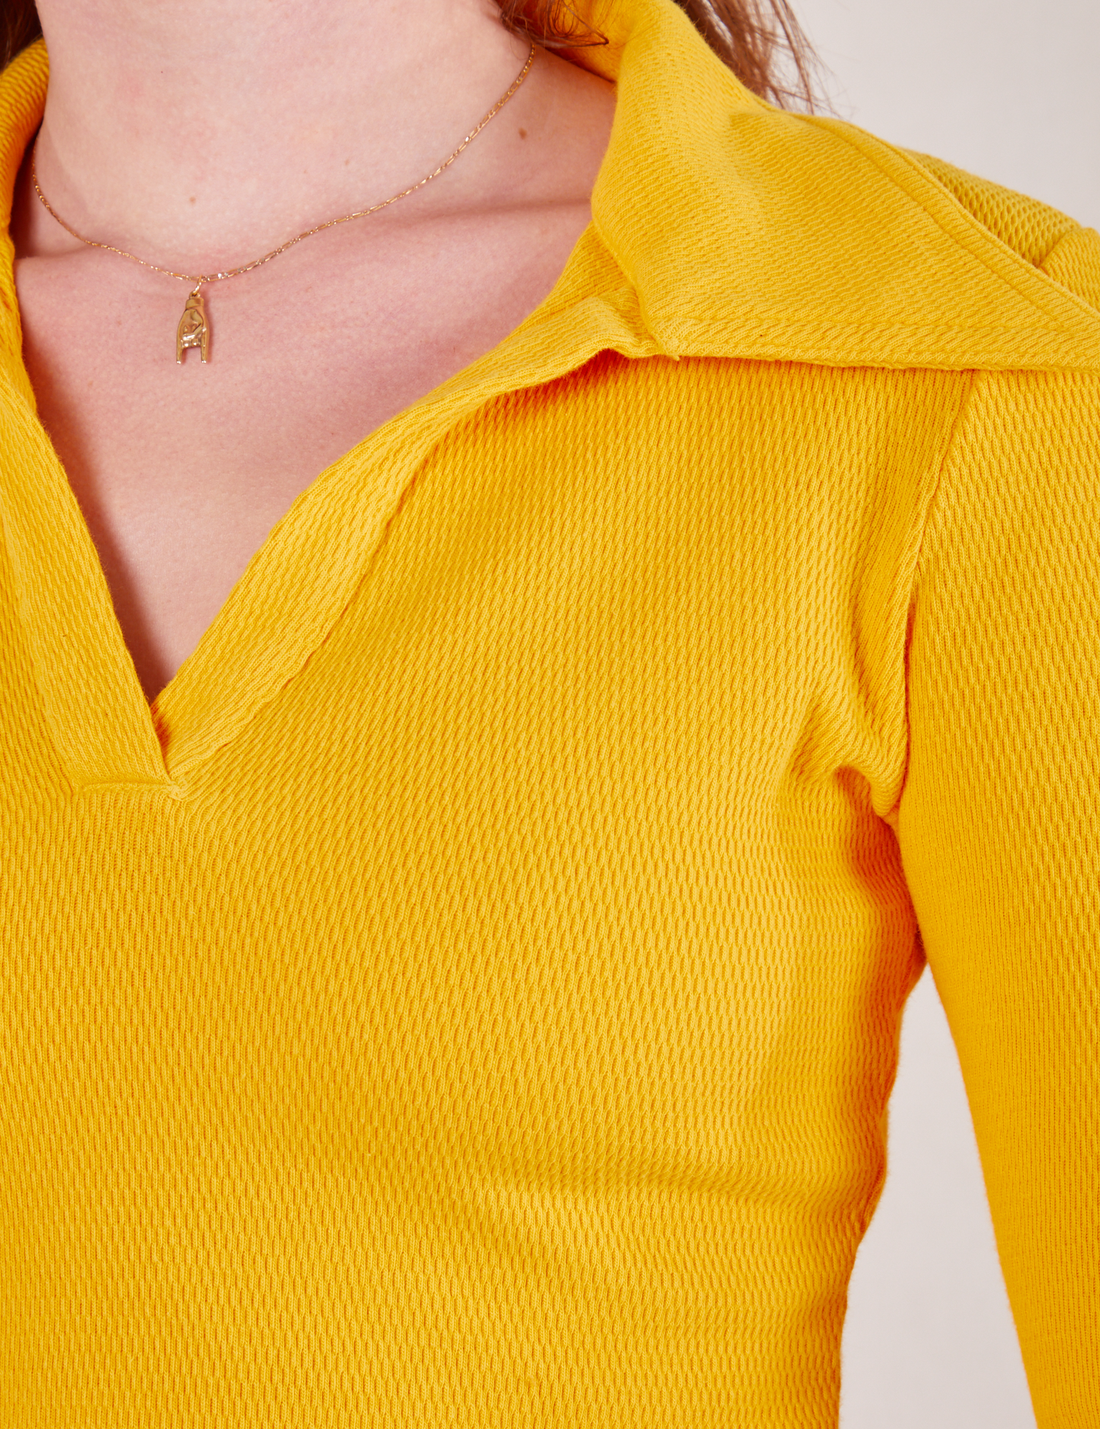 Long Sleeve Fisherman Polo in Sunshine Yellow front close up on Alex